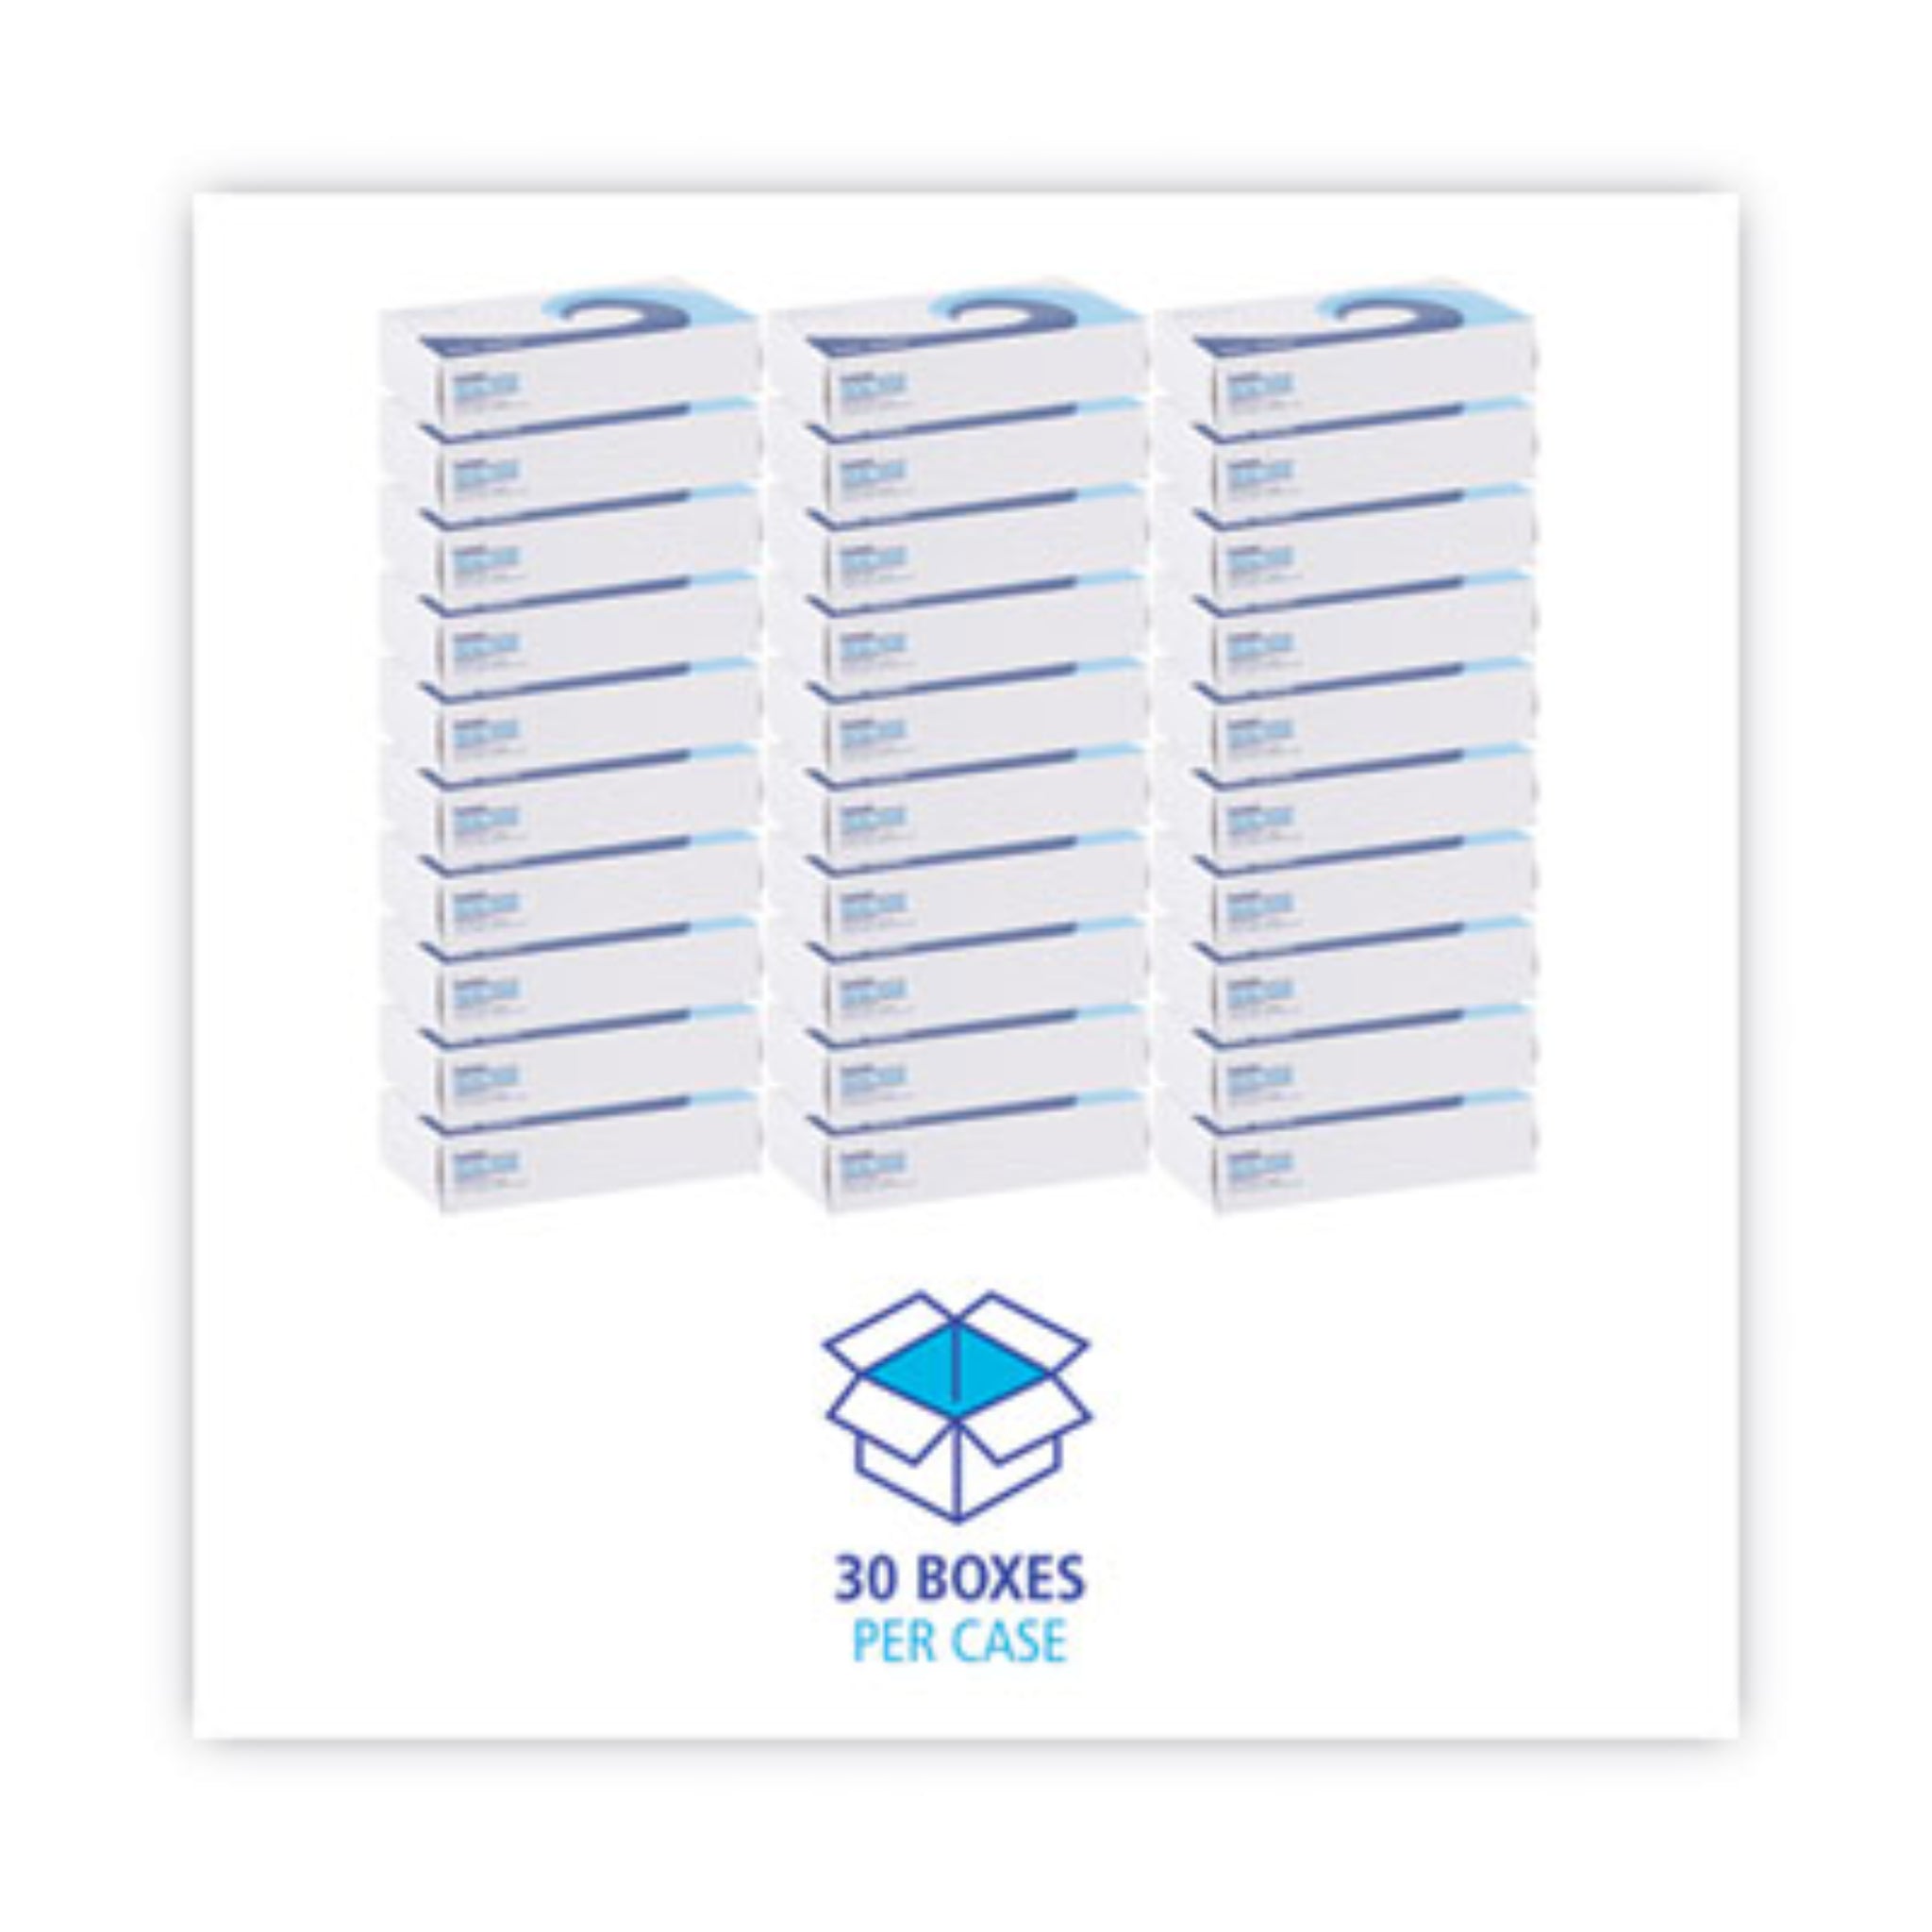 BOARDWALK BWK6500B Office Packs Facial Tissue, Case of 30 Boxes